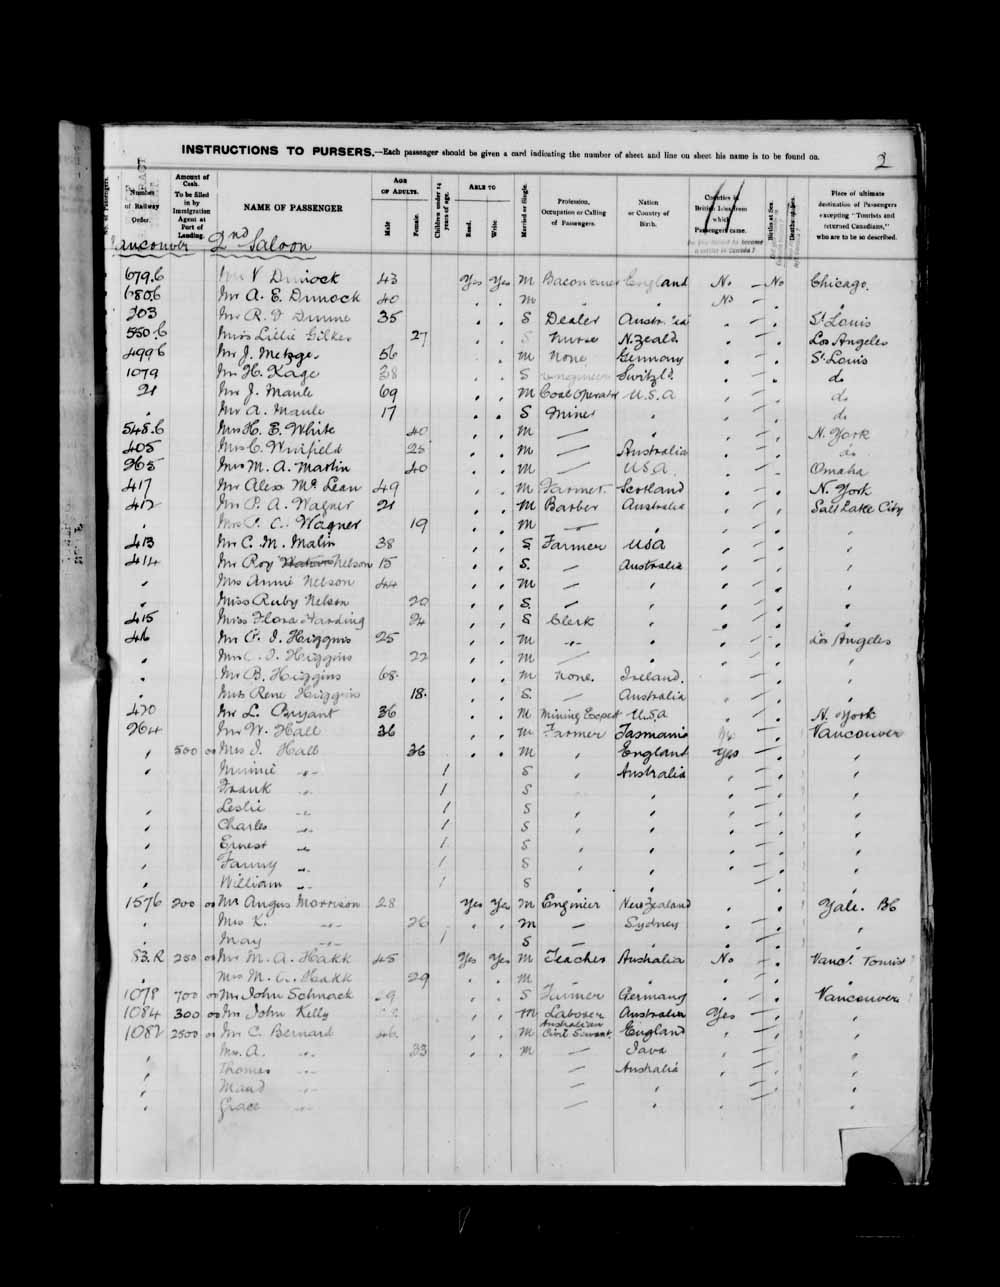 Digitized page of Passenger Lists for Image No.: e003635030